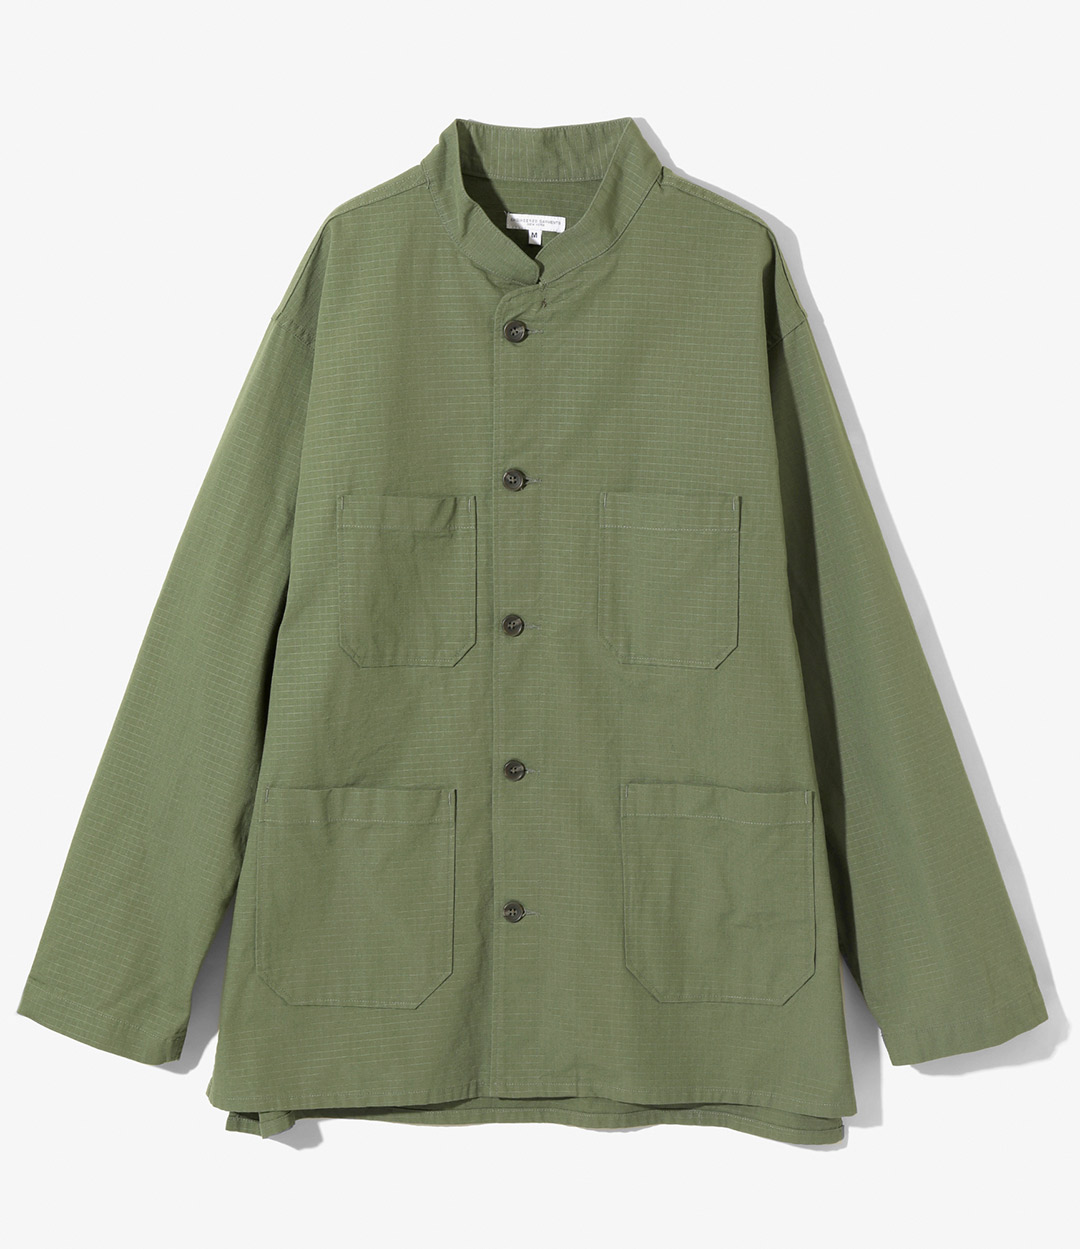 〈ENGINEERED GARMENTS〉NEPENTHES限定アイテム